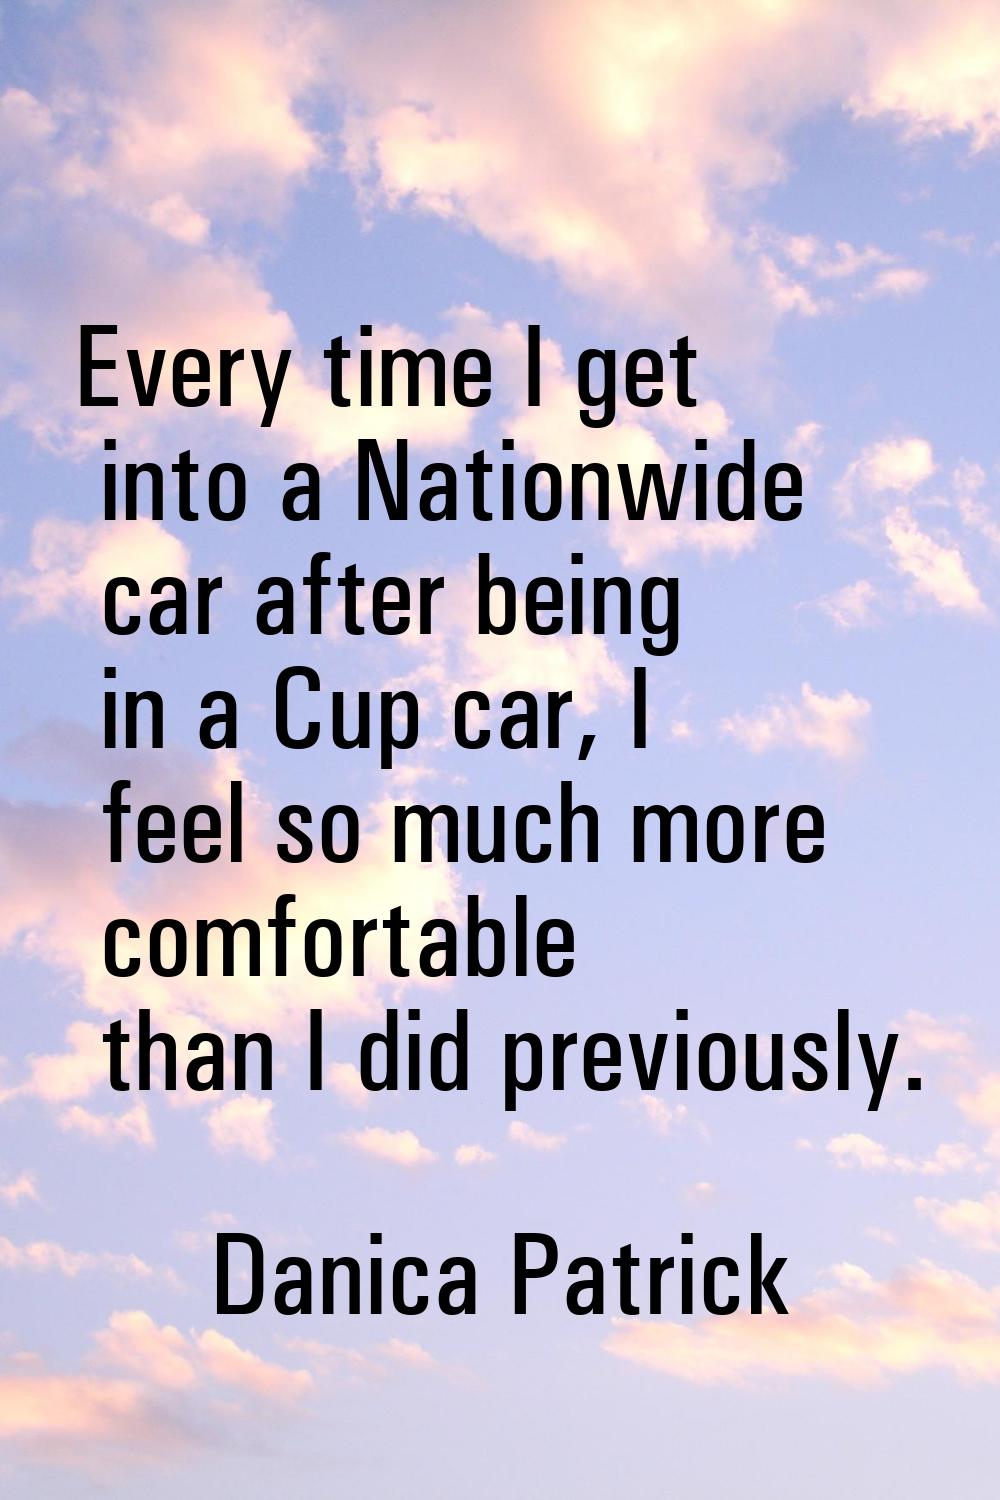 Every time I get into a Nationwide car after being in a Cup car, I feel so much more comfortable th